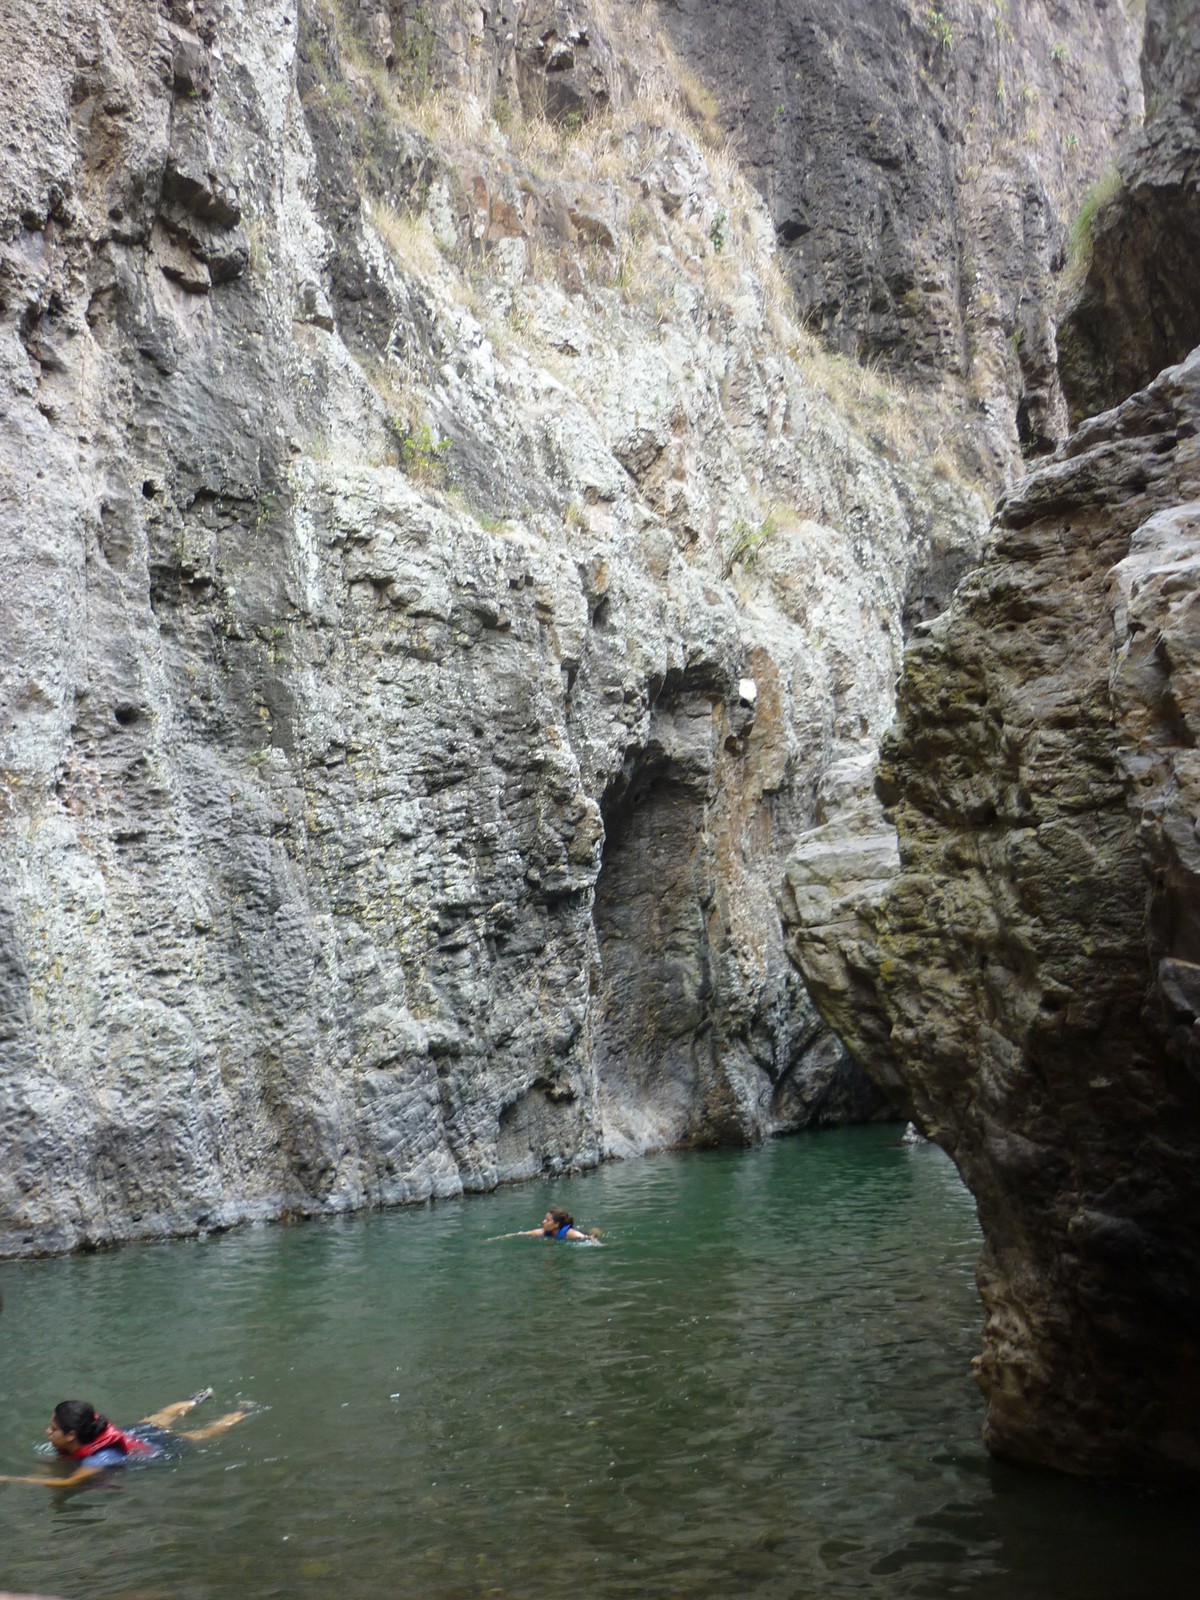 You have to swim for a lot of the canyon trek